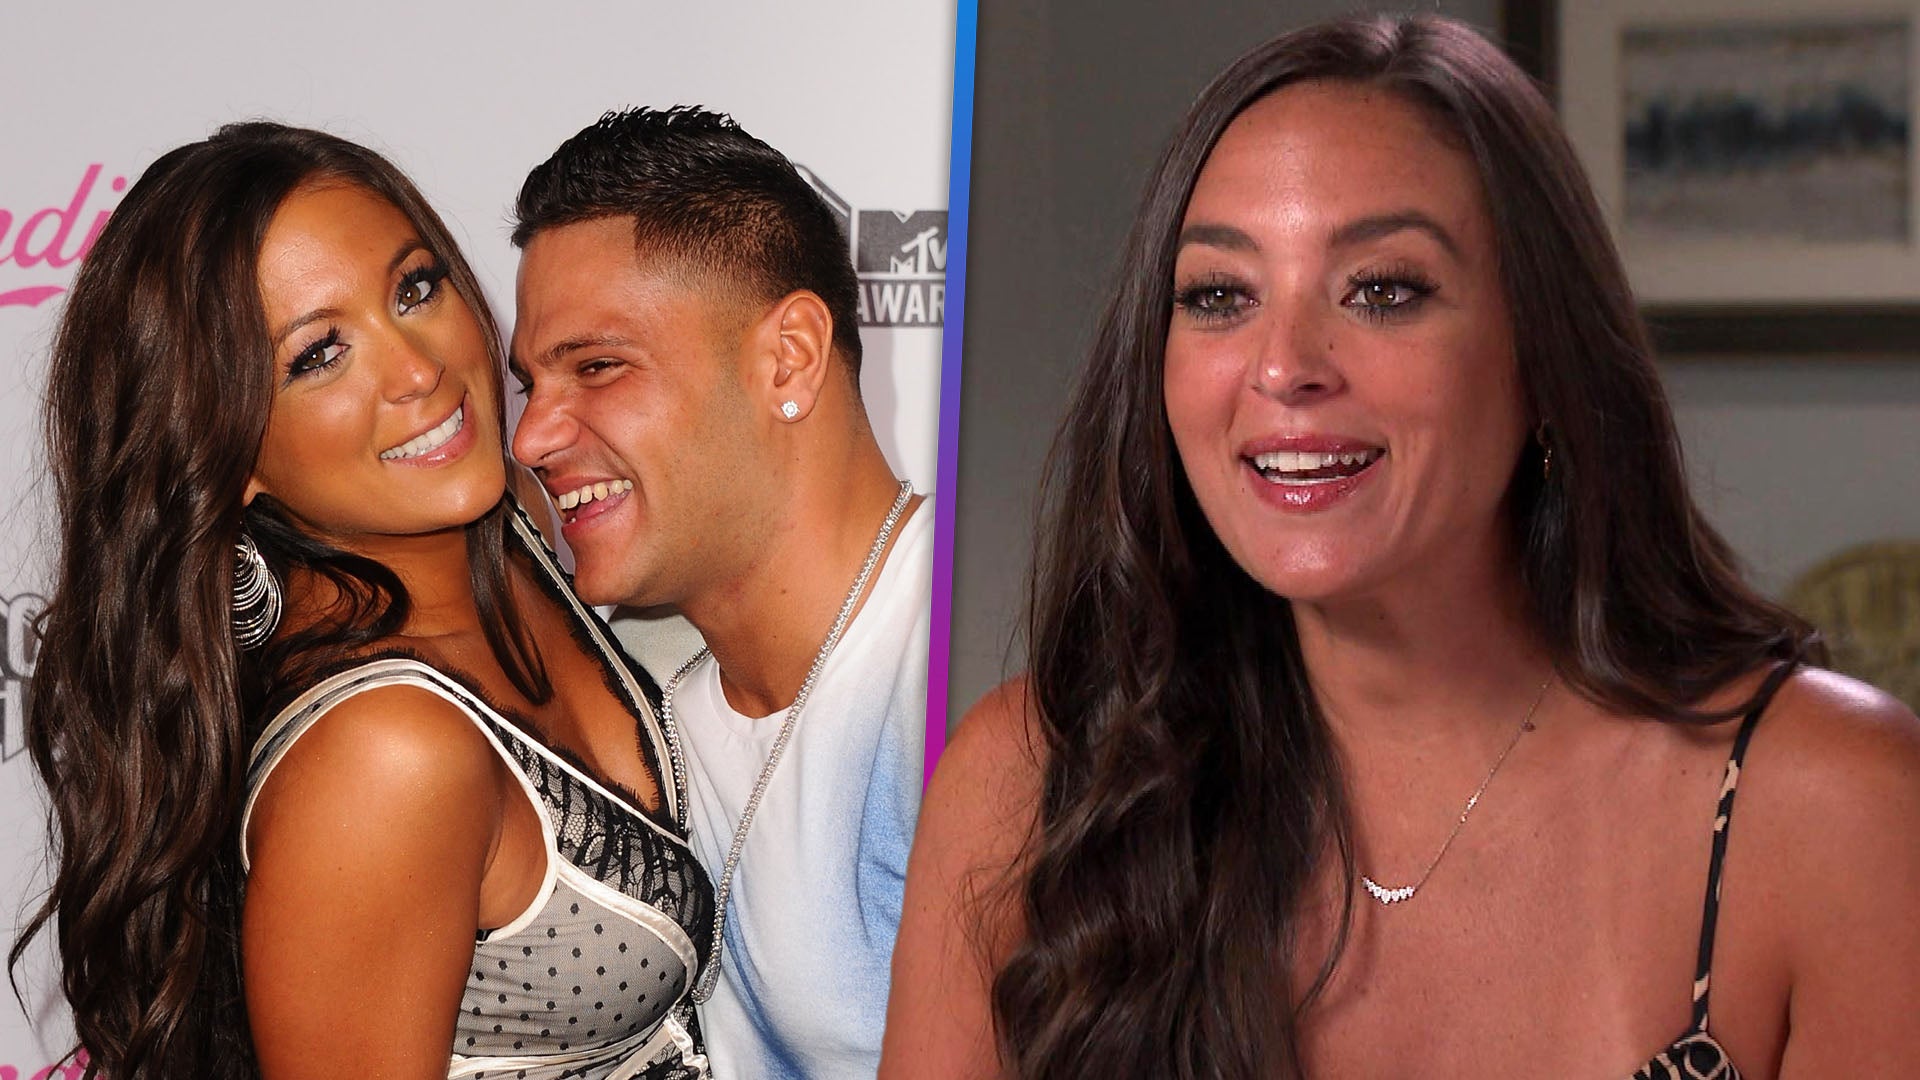 ‘Jersey Shore's Sammi Sweetheart Dishes on Having to Film Again With Ex ...